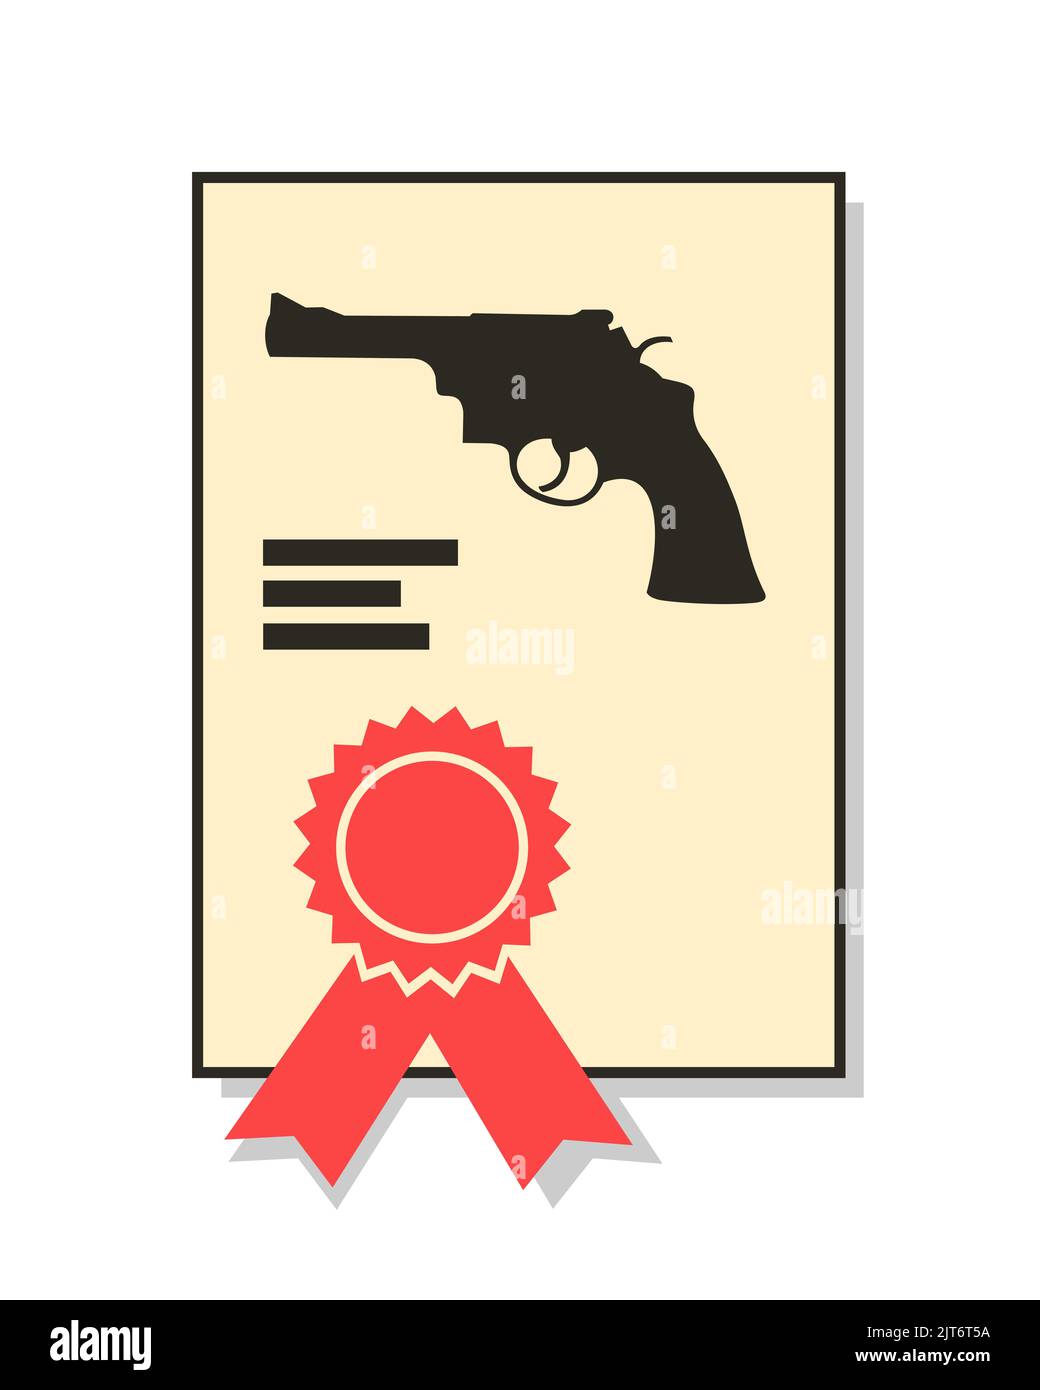 Firearm license and gun licence - official document of permission for weapon. Vector illustration isolated on white. Stock Photo